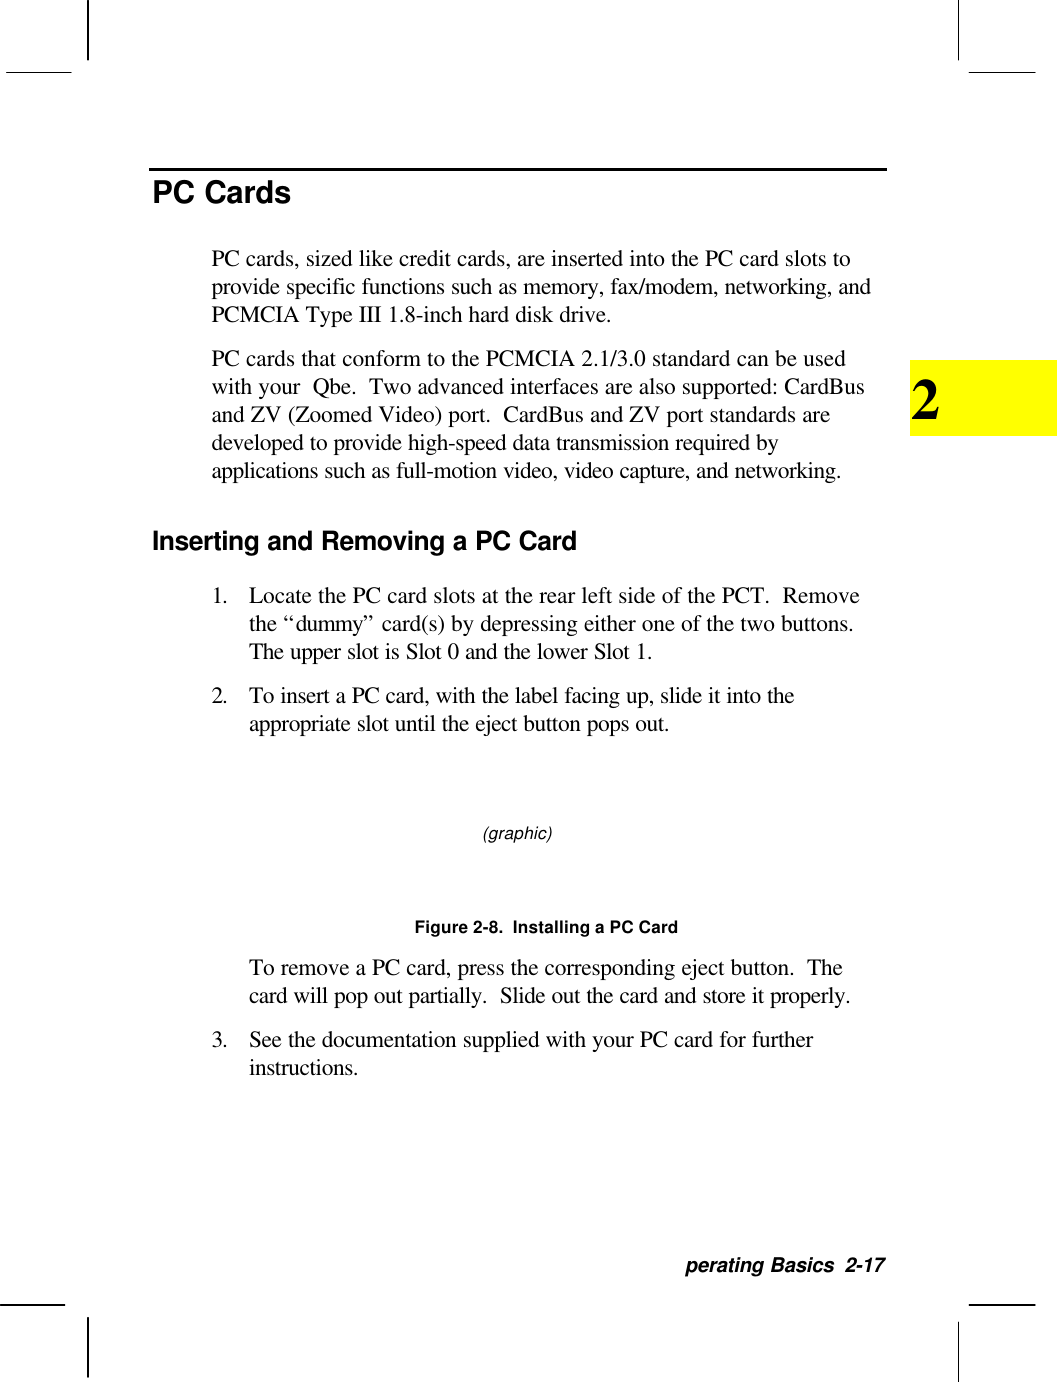 perating Basics  2-172PC CardsPC cards, sized like credit cards, are inserted into the PC card slots toprovide specific functions such as memory, fax/modem, networking, andPCMCIA Type III 1.8-inch hard disk drive.PC cards that conform to the PCMCIA 2.1/3.0 standard can be usedwith your  Qbe.  Two advanced interfaces are also supported: CardBusand ZV (Zoomed Video) port.  CardBus and ZV port standards aredeveloped to provide high-speed data transmission required byapplications such as full-motion video, video capture, and networking.Inserting and Removing a PC Card1. Locate the PC card slots at the rear left side of the PCT.  Removethe “dummy” card(s) by depressing either one of the two buttons.The upper slot is Slot 0 and the lower Slot 1.2. To insert a PC card, with the label facing up, slide it into theappropriate slot until the eject button pops out.(graphic)Figure 2-8.  Installing a PC CardTo remove a PC card, press the corresponding eject button.  Thecard will pop out partially.  Slide out the card and store it properly.3. See the documentation supplied with your PC card for furtherinstructions.